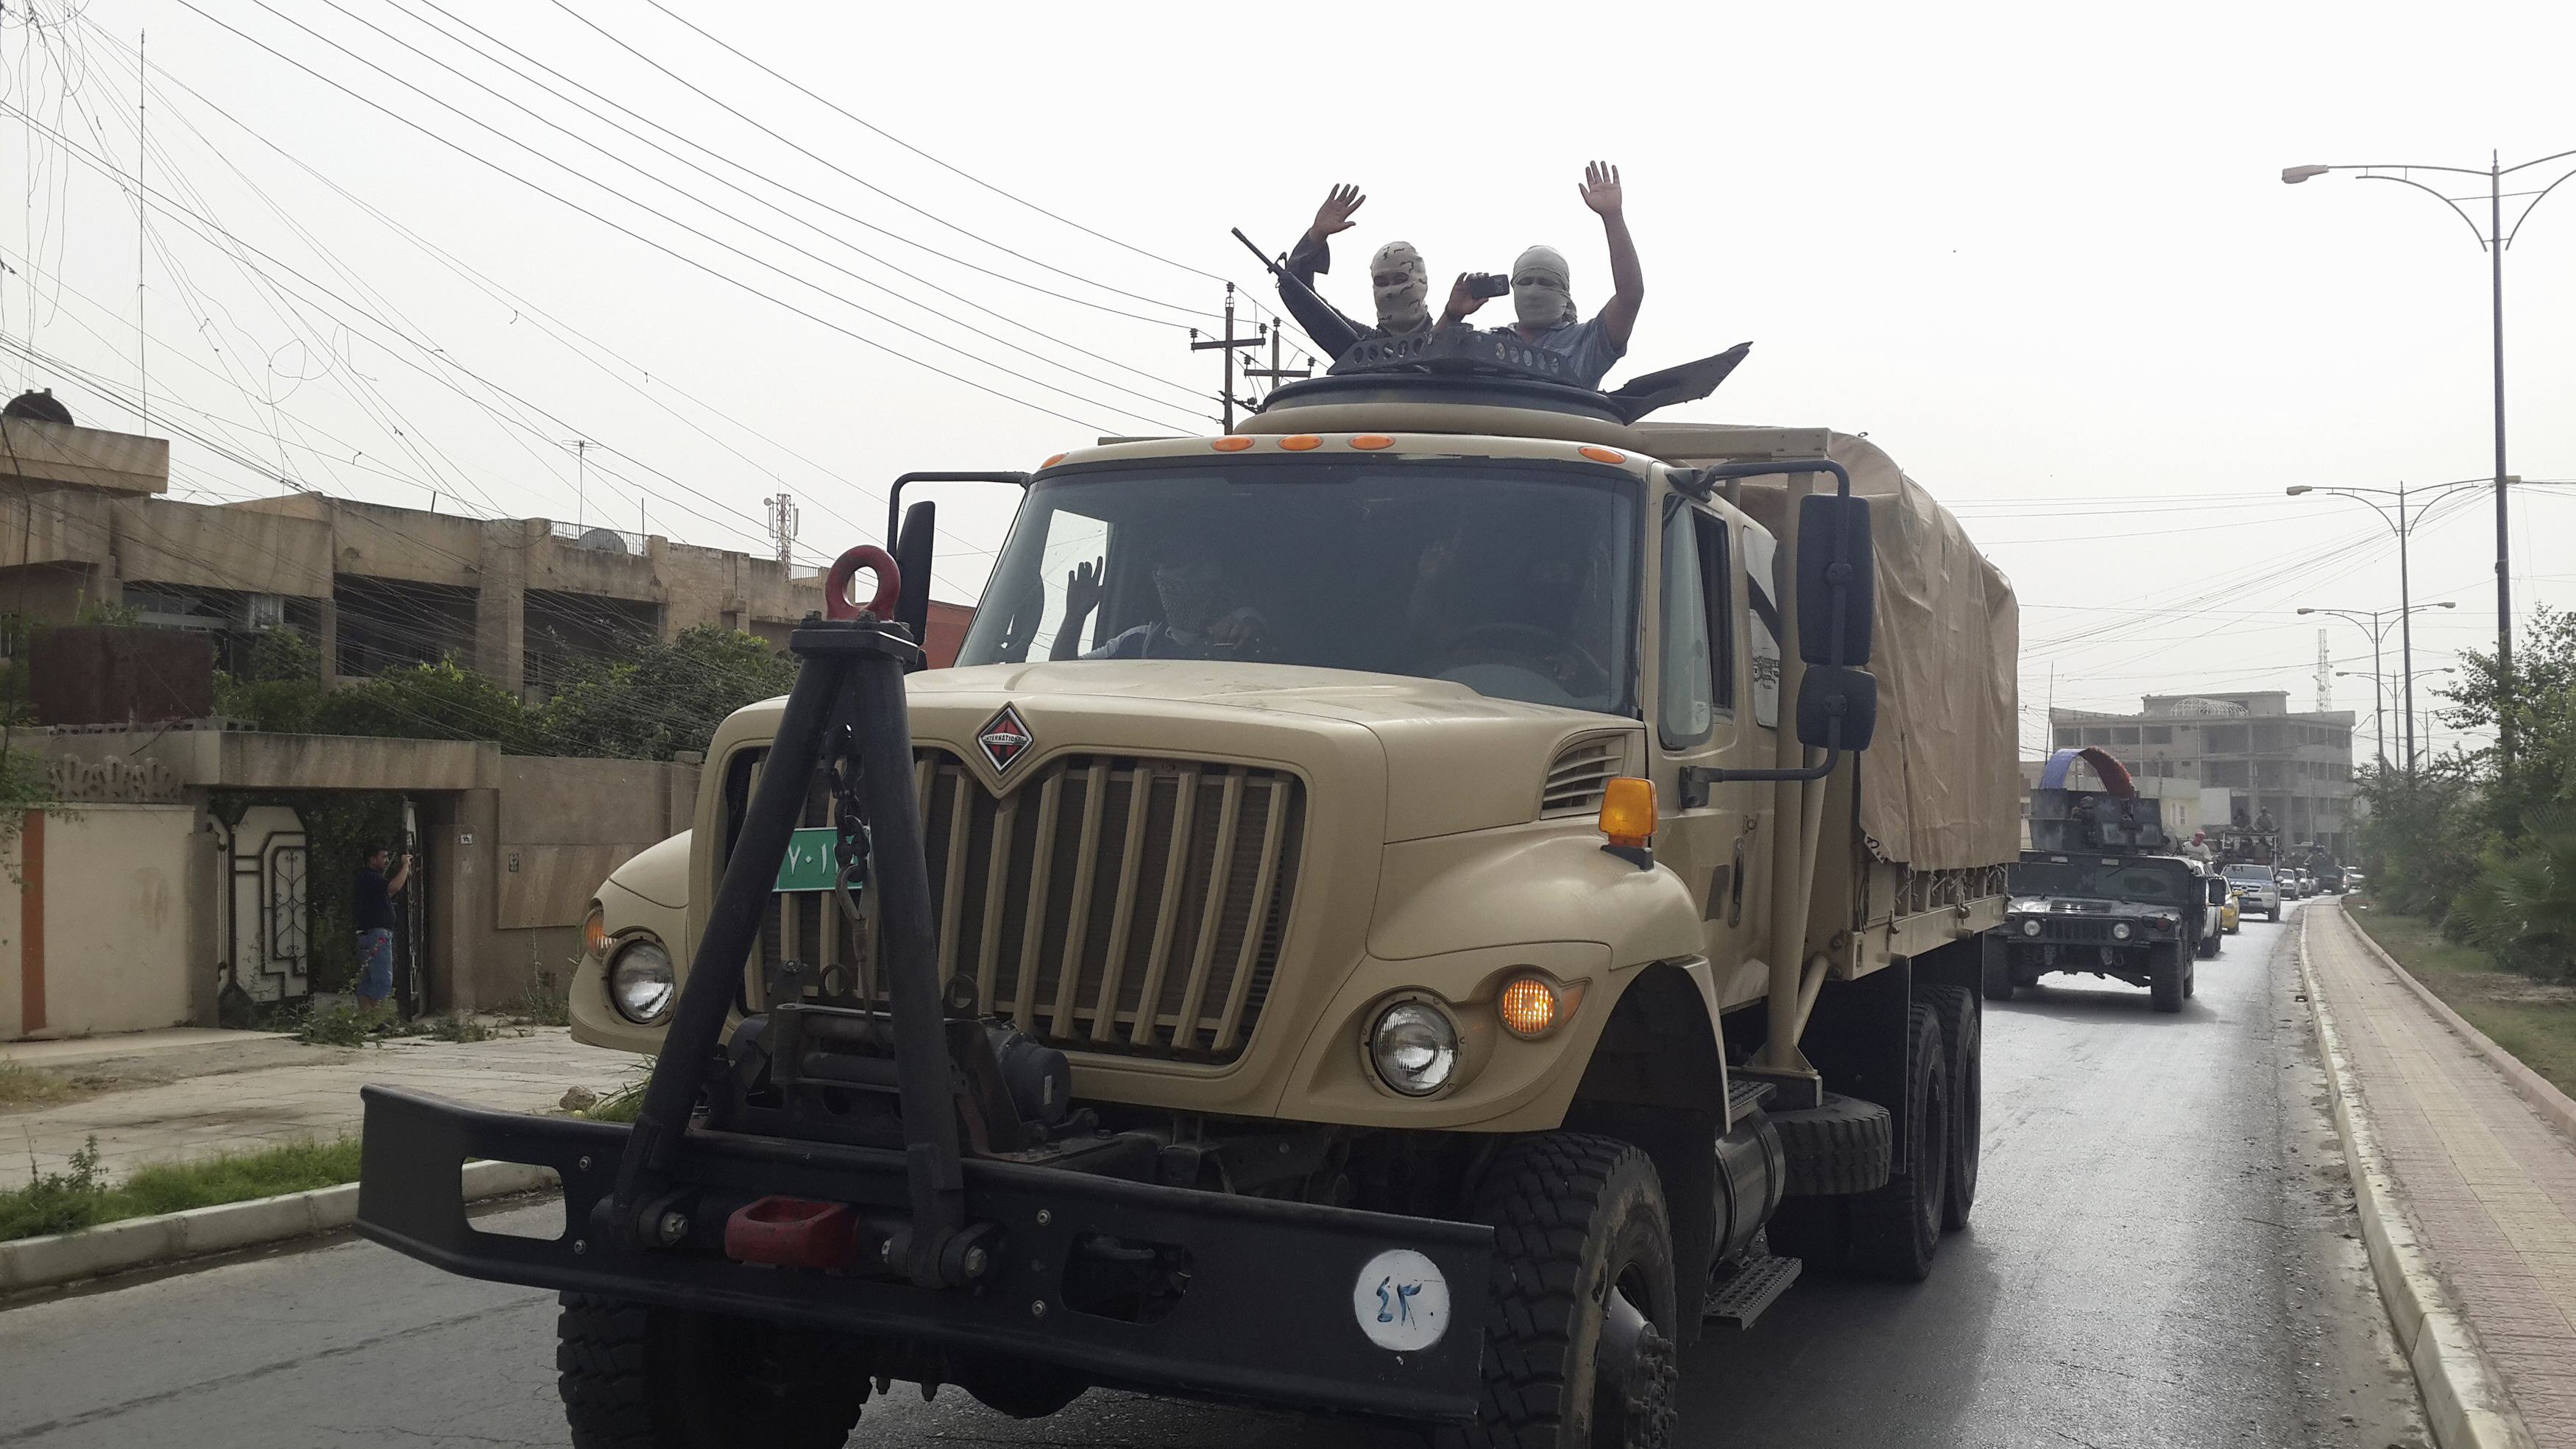 fighters of the islamic state of iraq and the levant isil celebrate on vehicles taken from iraqi security forces at a street in city of mosul june 12 2014 photo reuters